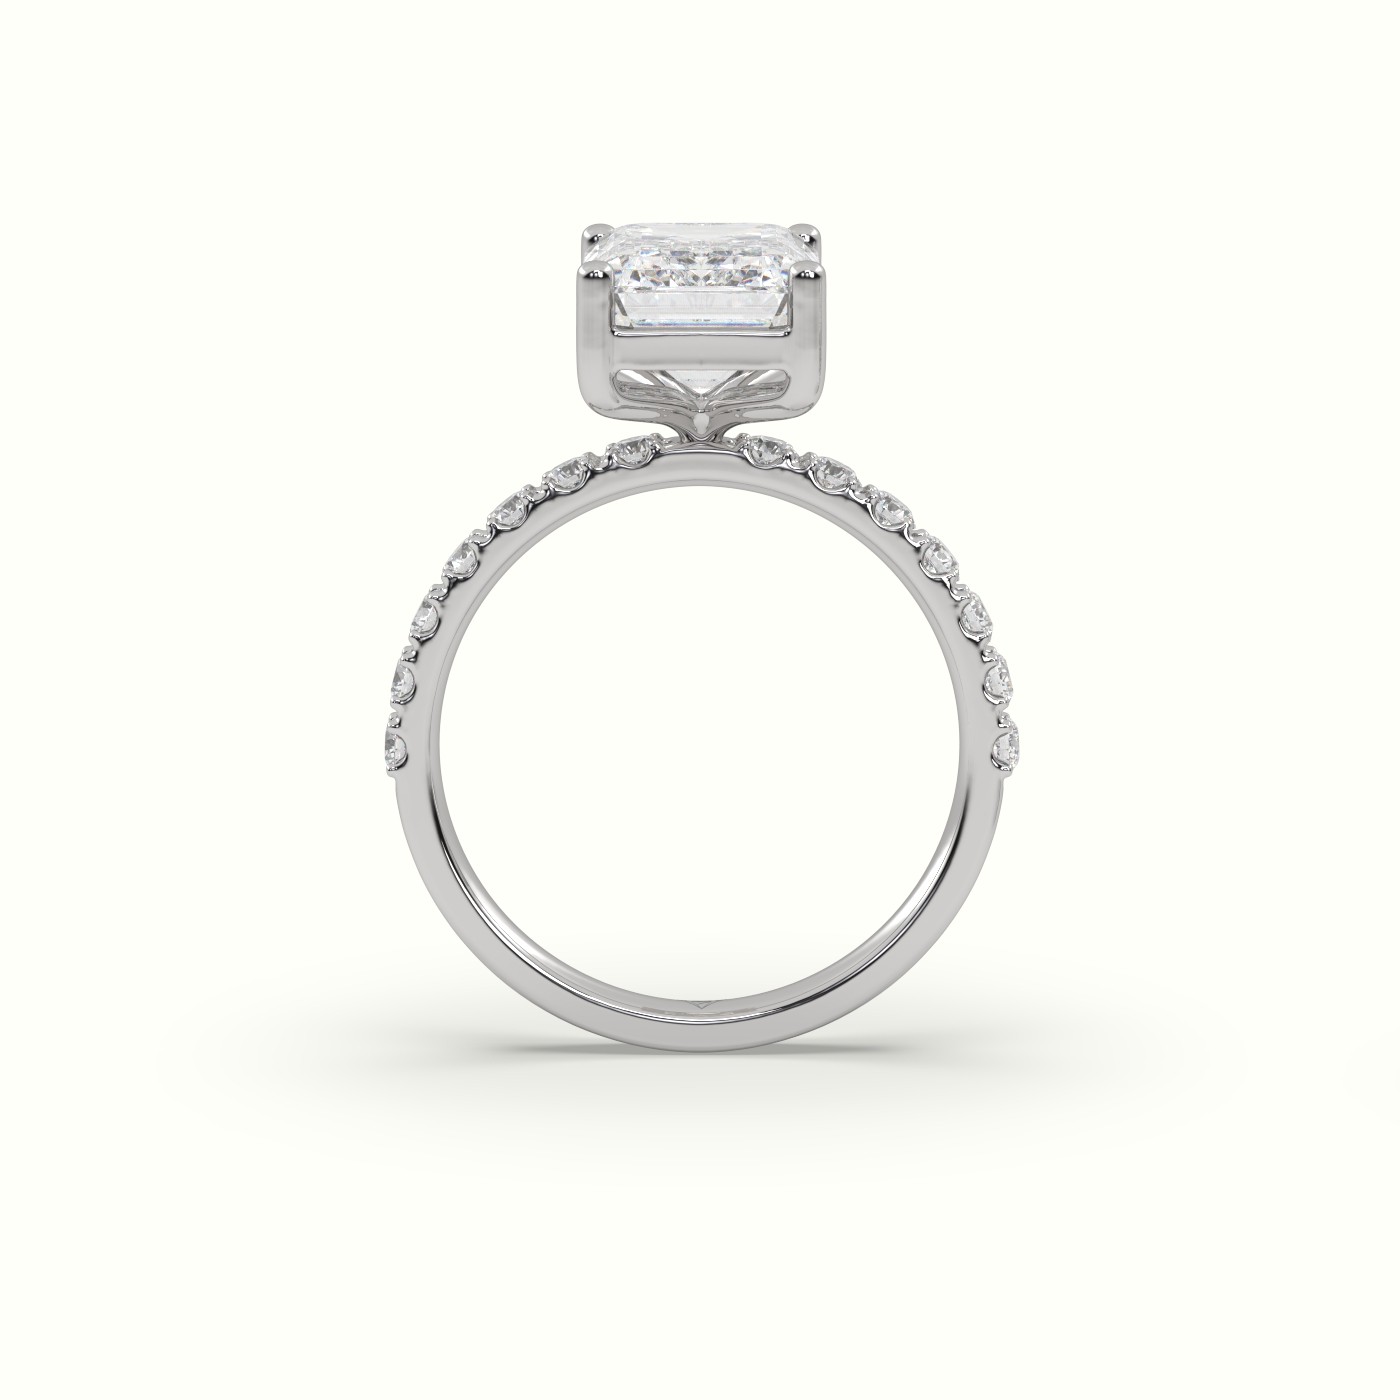 18K WHITE GOLD Emerald Cut Diamond Engagement Ring with Pave Band